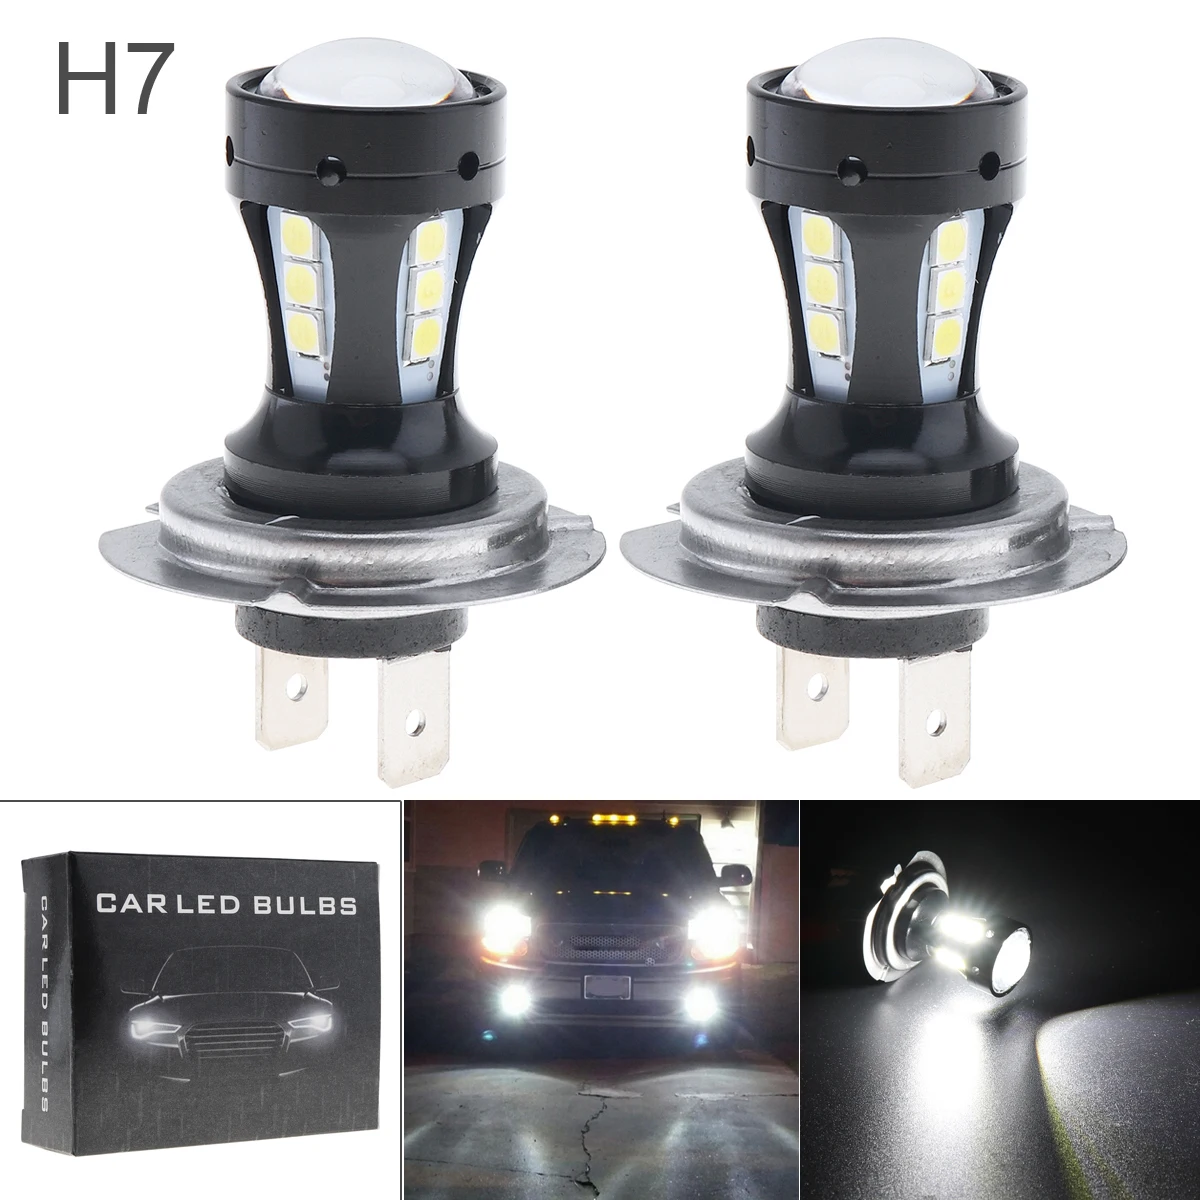 

2pcs Car Light 18W 950LM H7 High Power 18 x 3030 SMD LED Chips 6500K White Lights Foglight for Cars Auto Vehicle